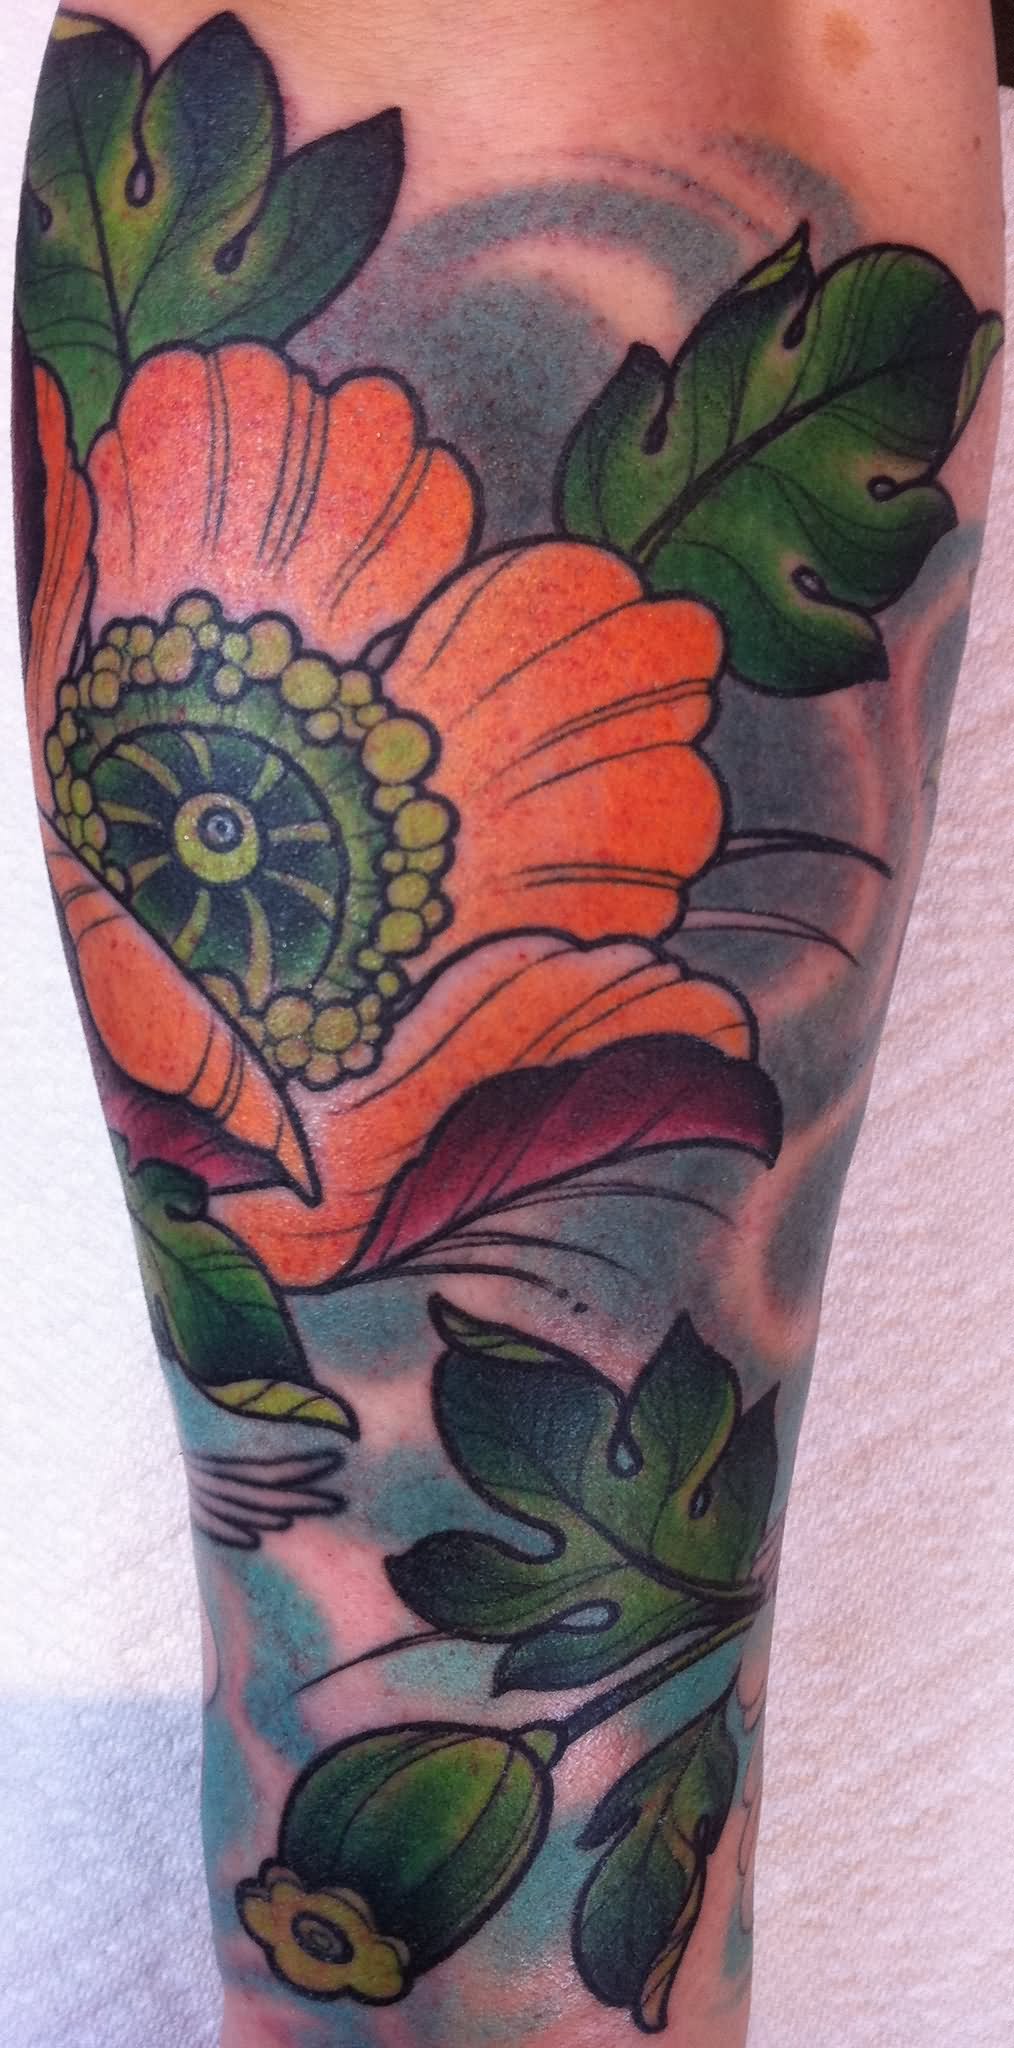 Traditional Poppy Flower Tattoo Design For Sleeve By